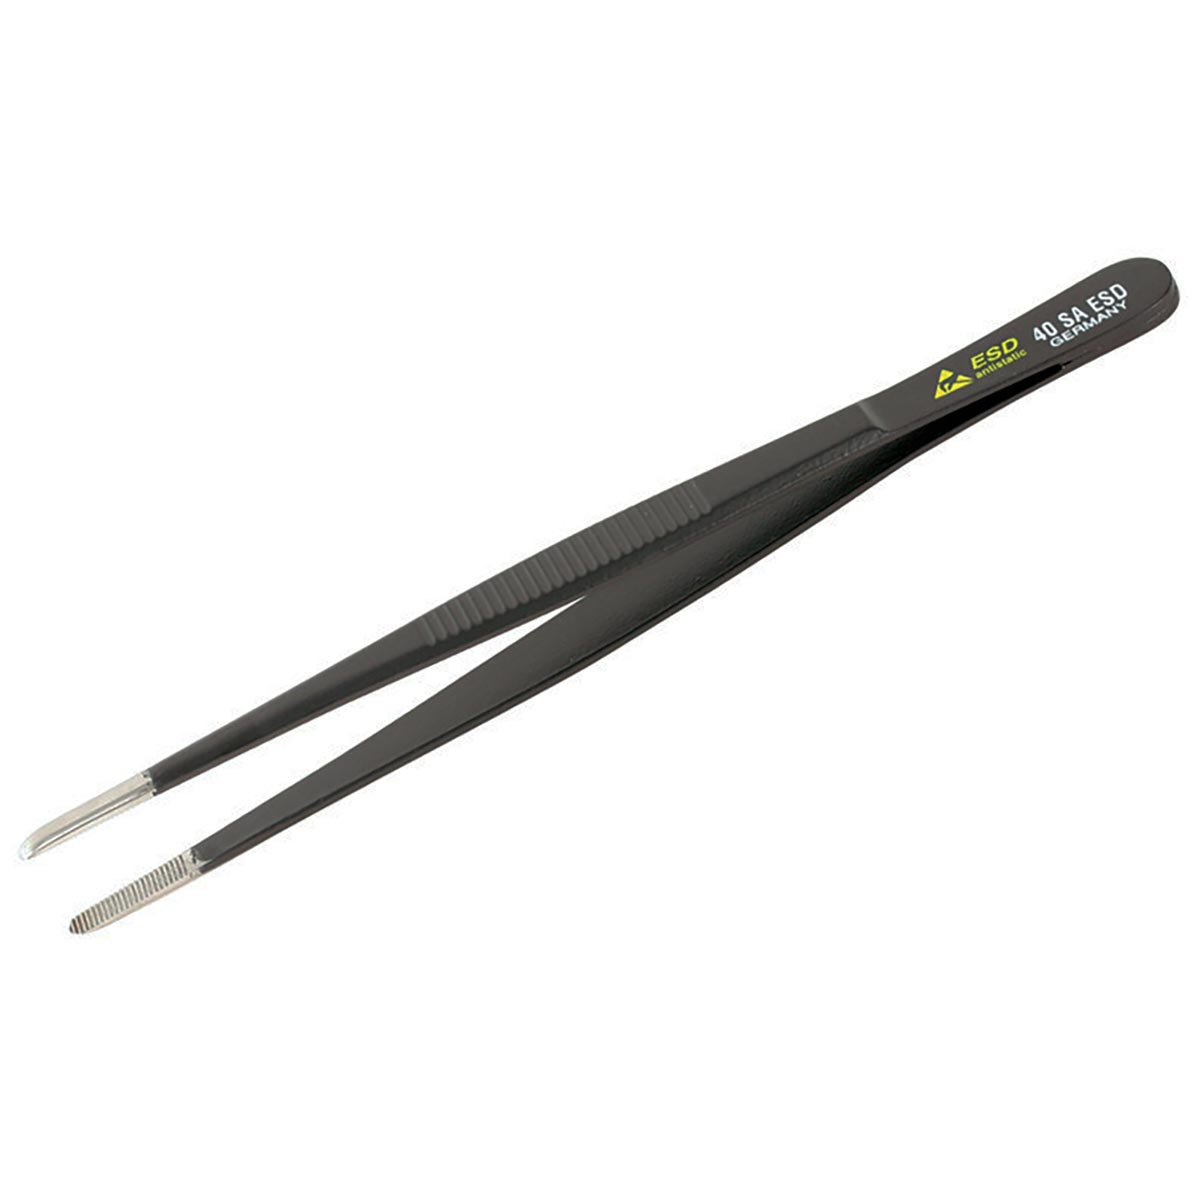 Wiha Esd Safe Tweezers 40 Sa - With Straight Serrated Blunt Tips 145mm